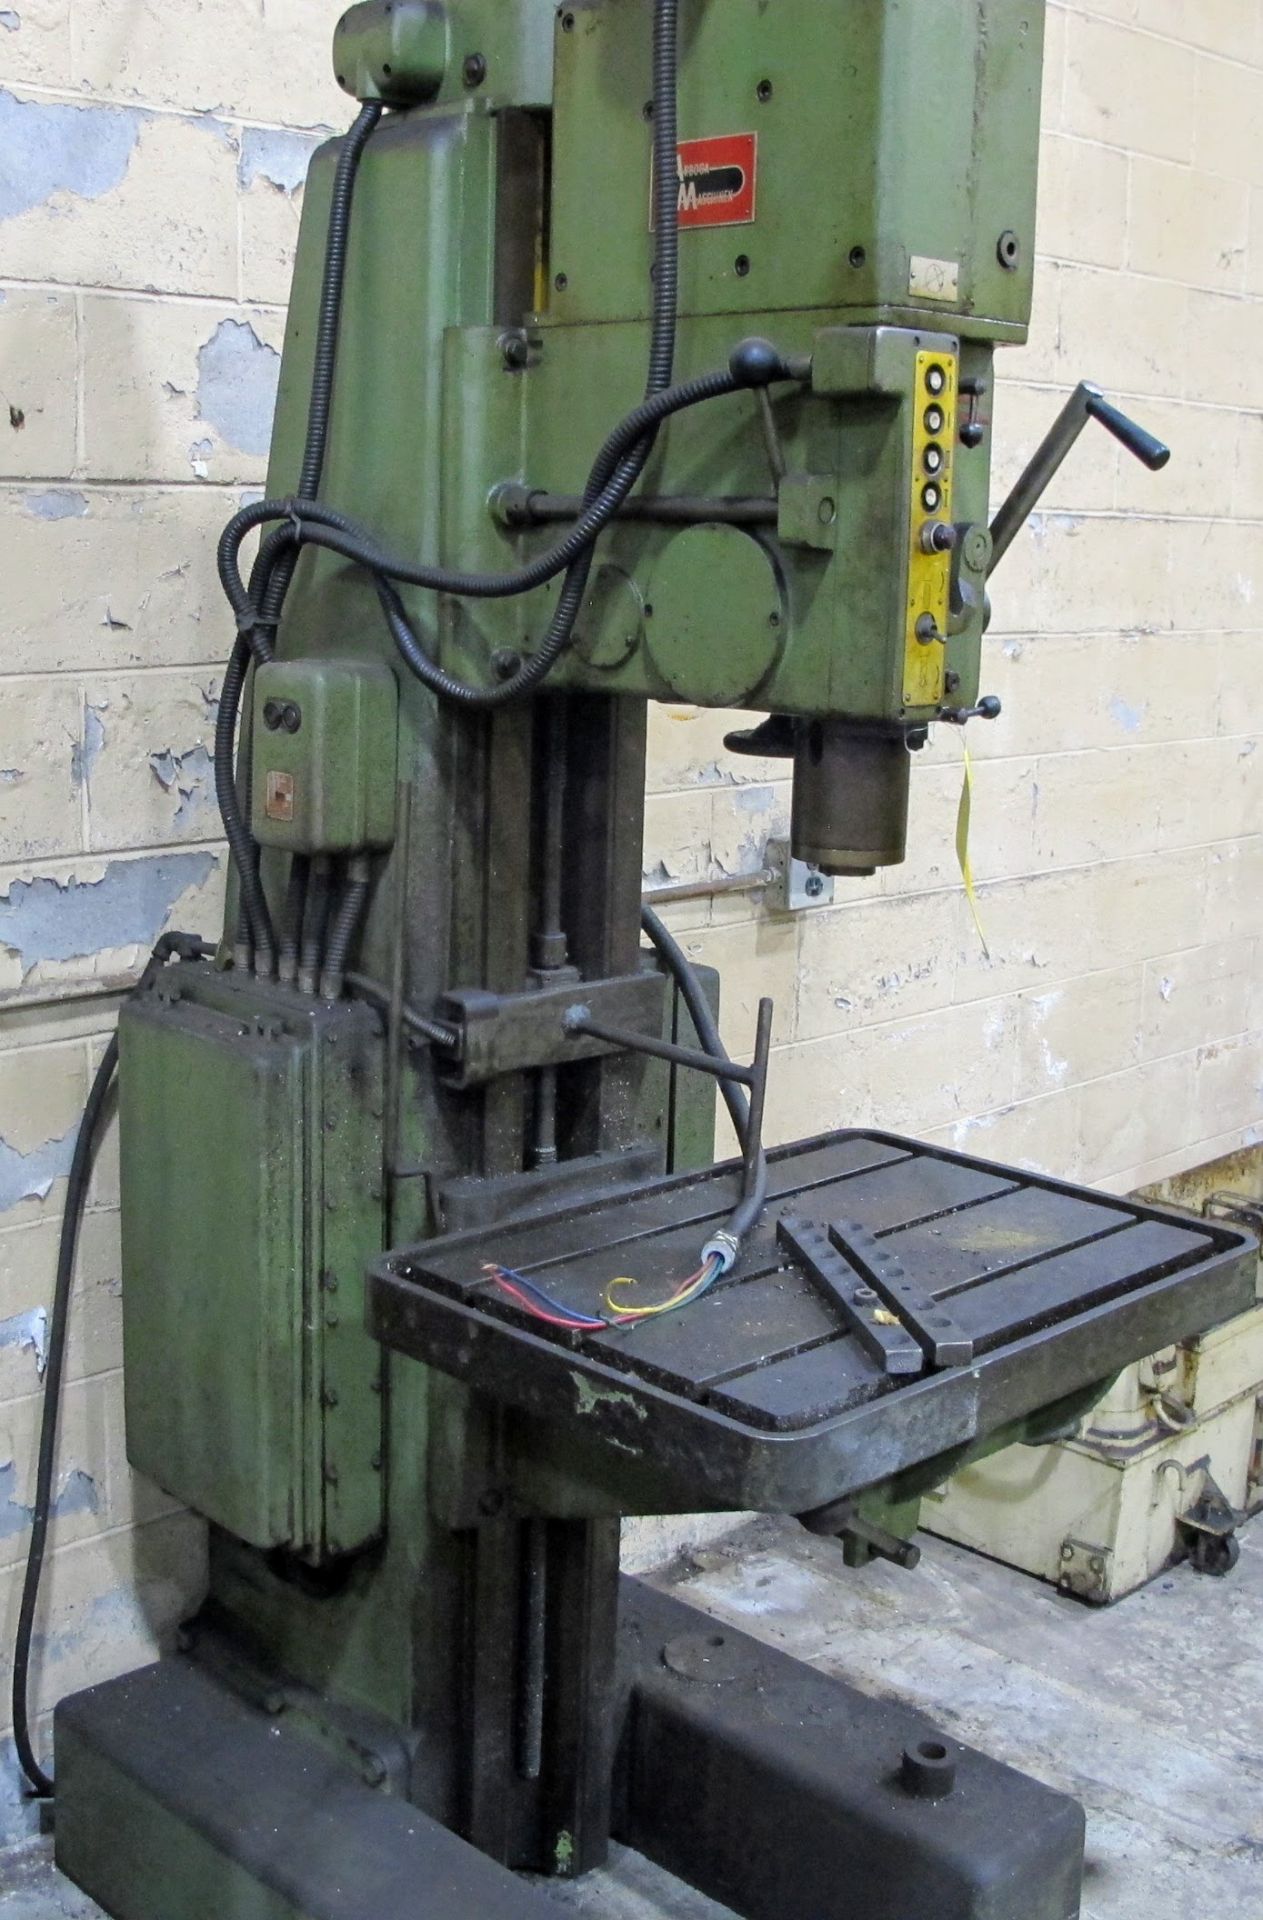 ARBOGA MASCHINEN M3/4/7 DRILL PRESS, 1 1/4" BORES, 60V, 28" X 20" TABLE, 63 TO 800 RPM, S/N 16225